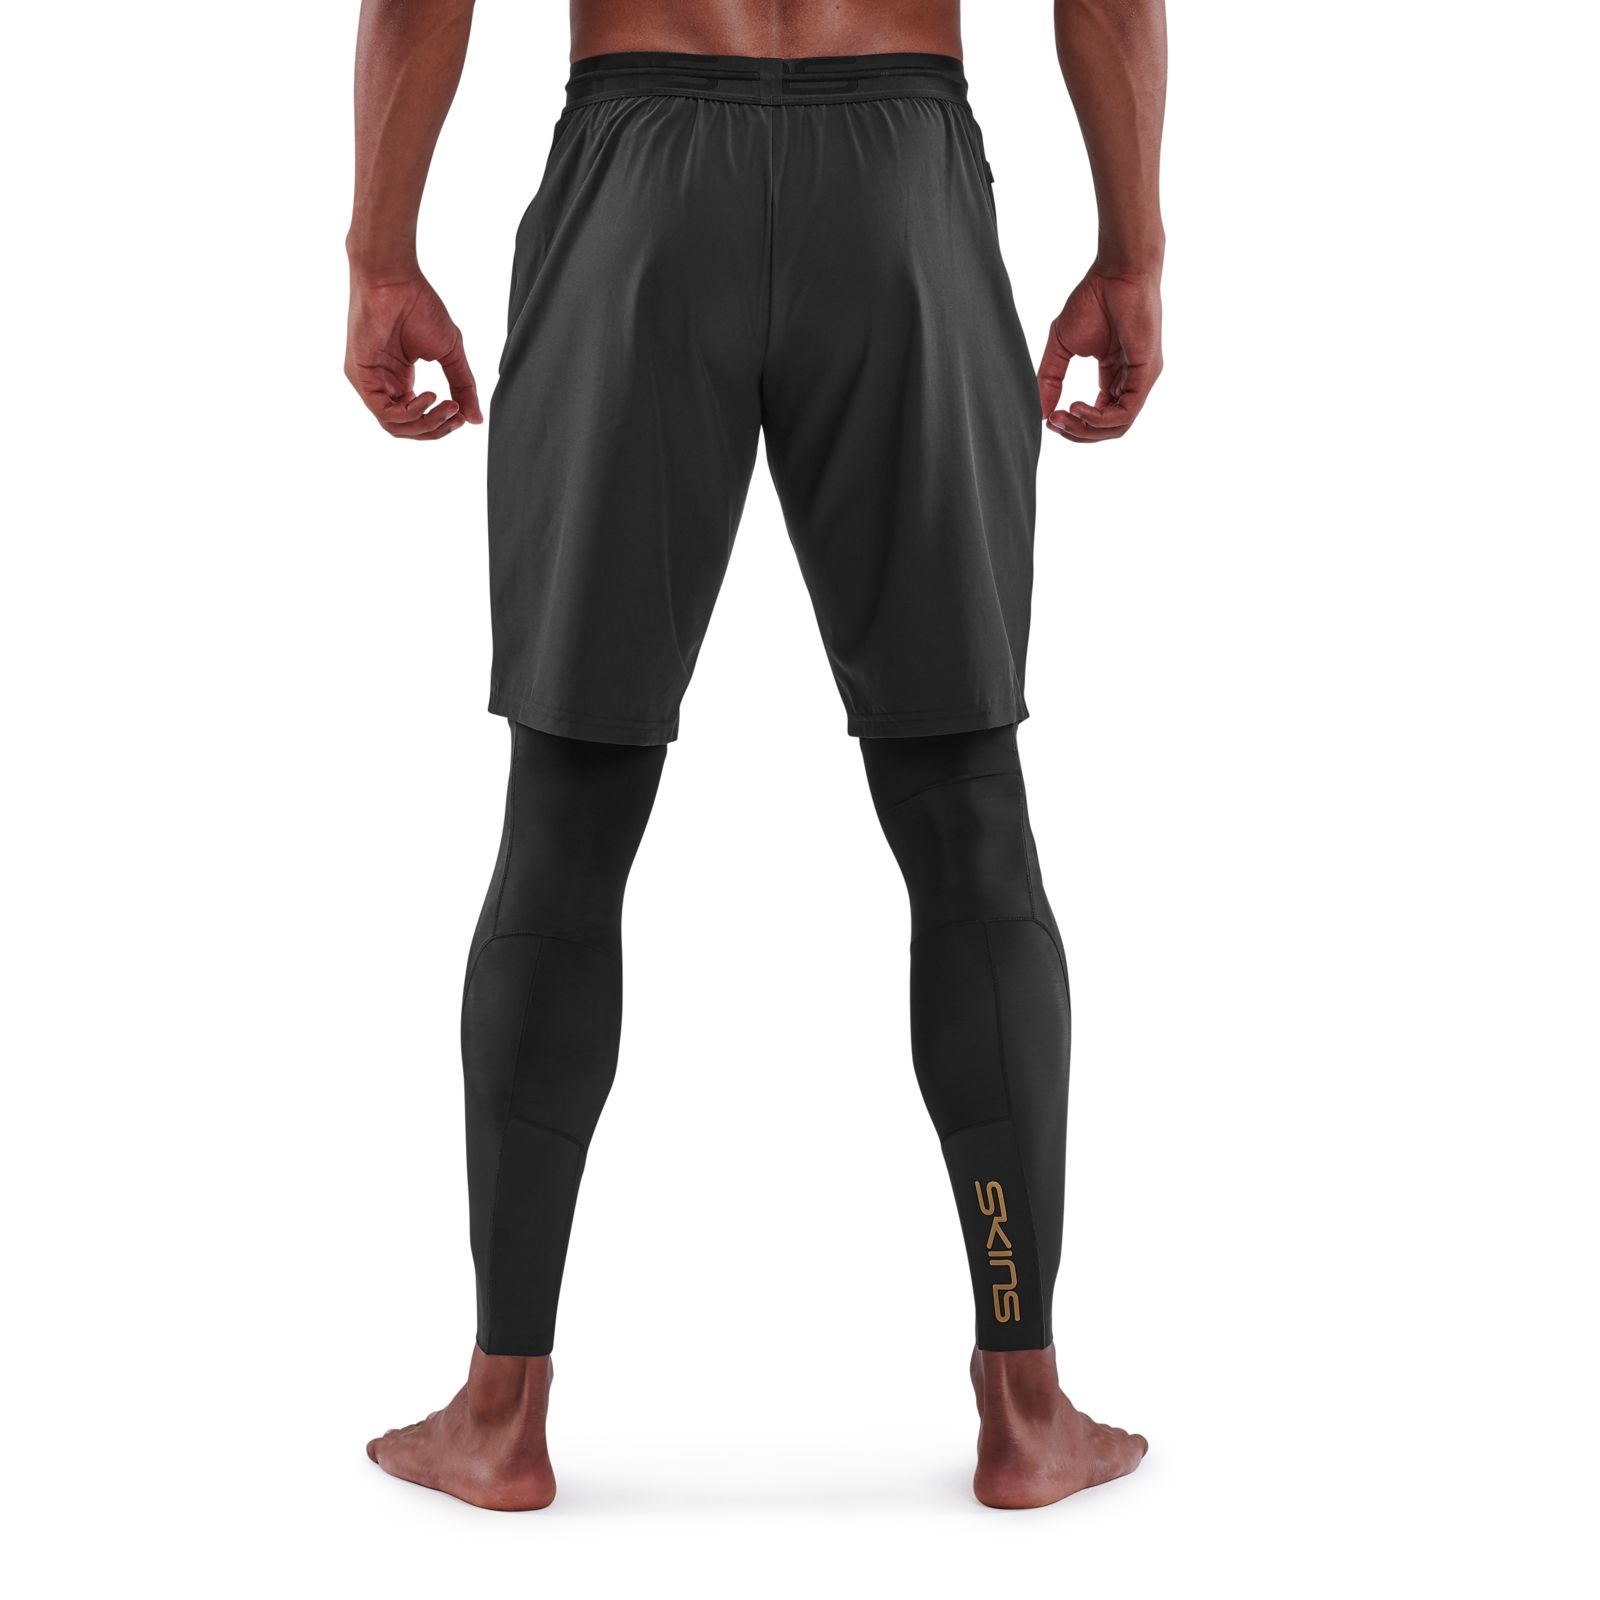 SKINS A400 YOUTH COMPRESSION LONG TIGHTS (BLACK/GOLD) - Olympus Sports